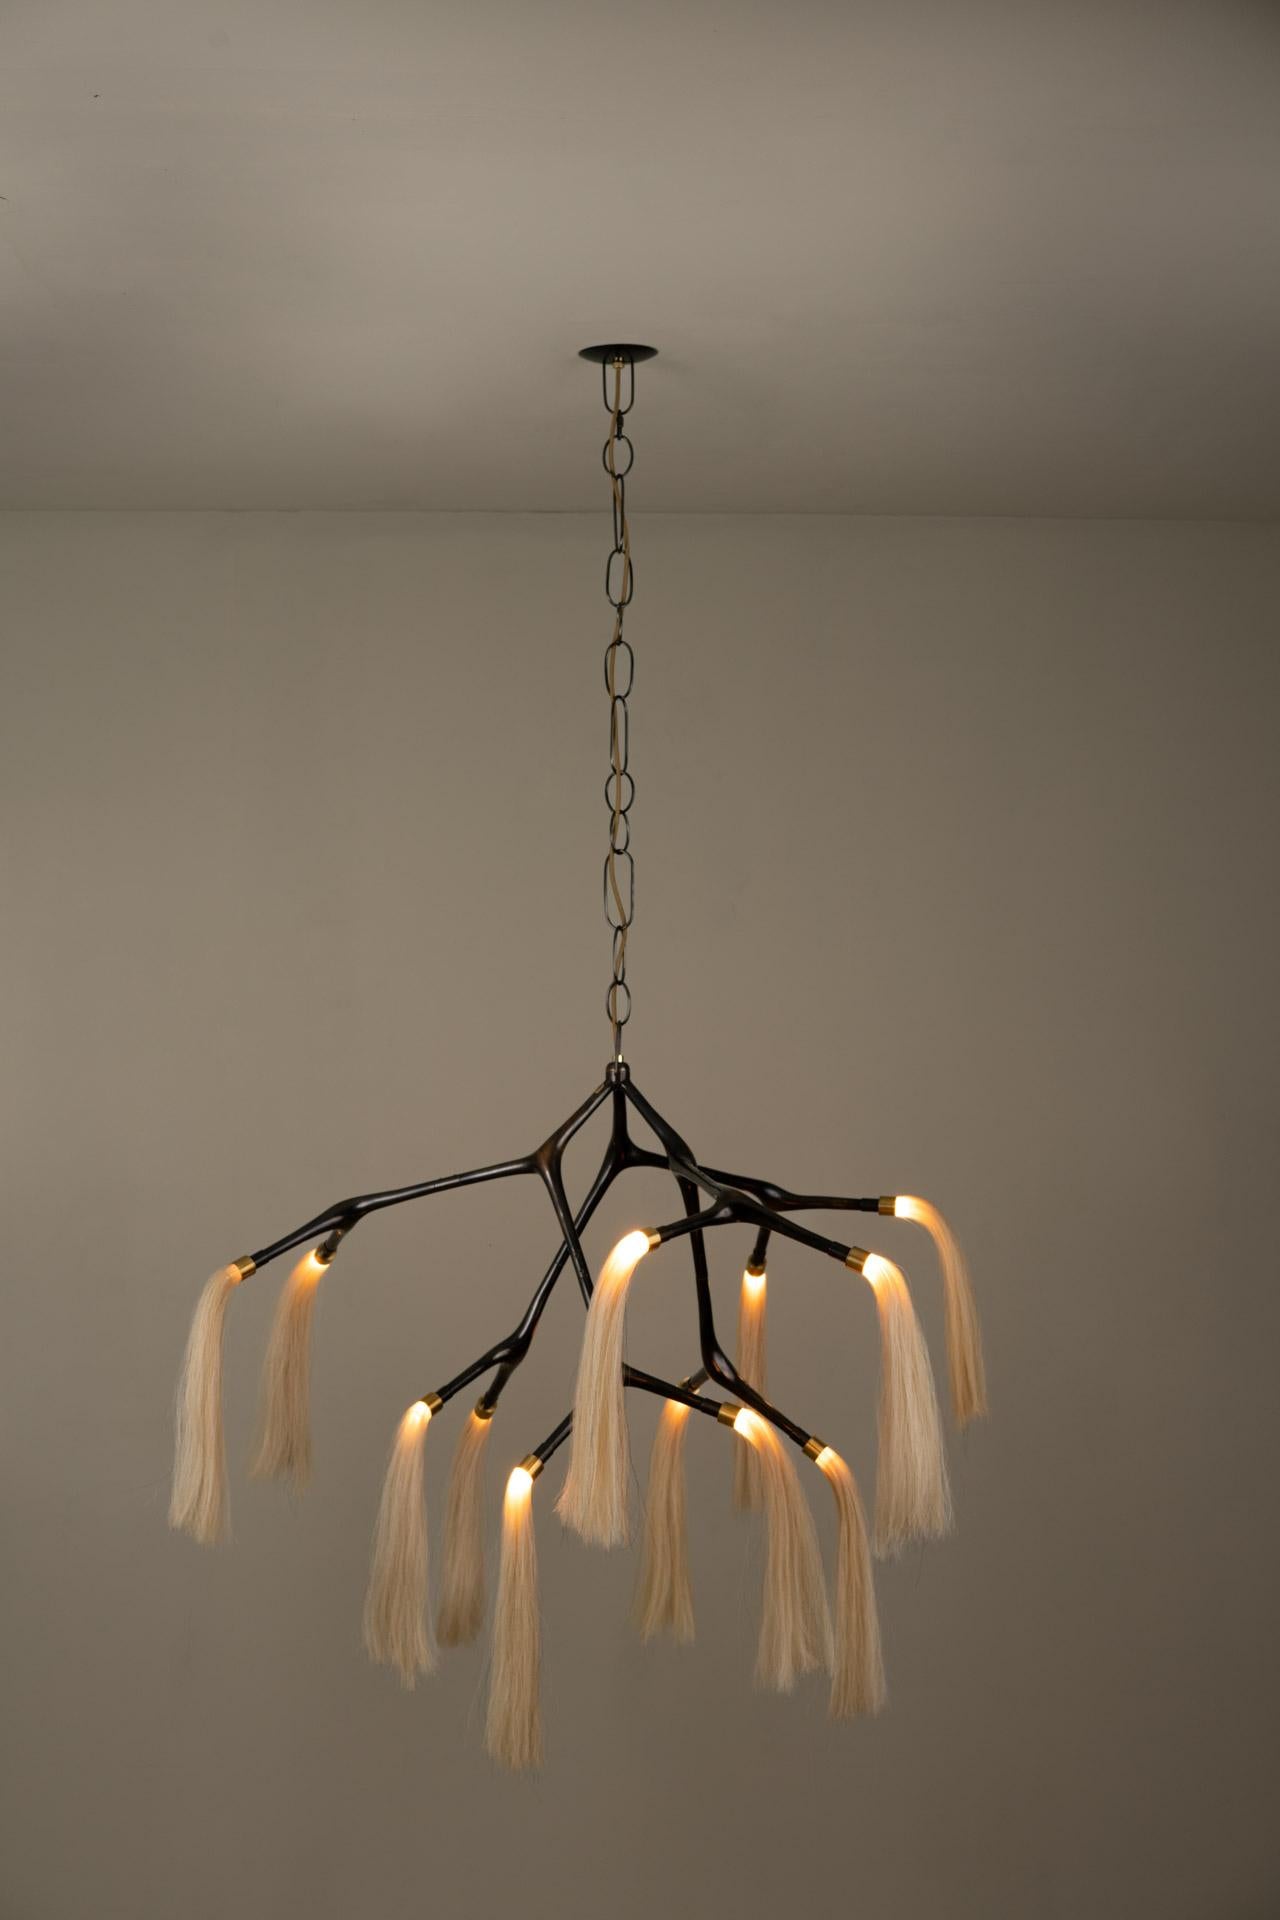 MARATUS chandelier was designed for the Mol collection by Mexican artist Isabel Moncada.

A chestnut horse with a white tail is called Palomino, it is dashing and atypical. This lamp is an allegory of its sumptuous presence. The vintage finish